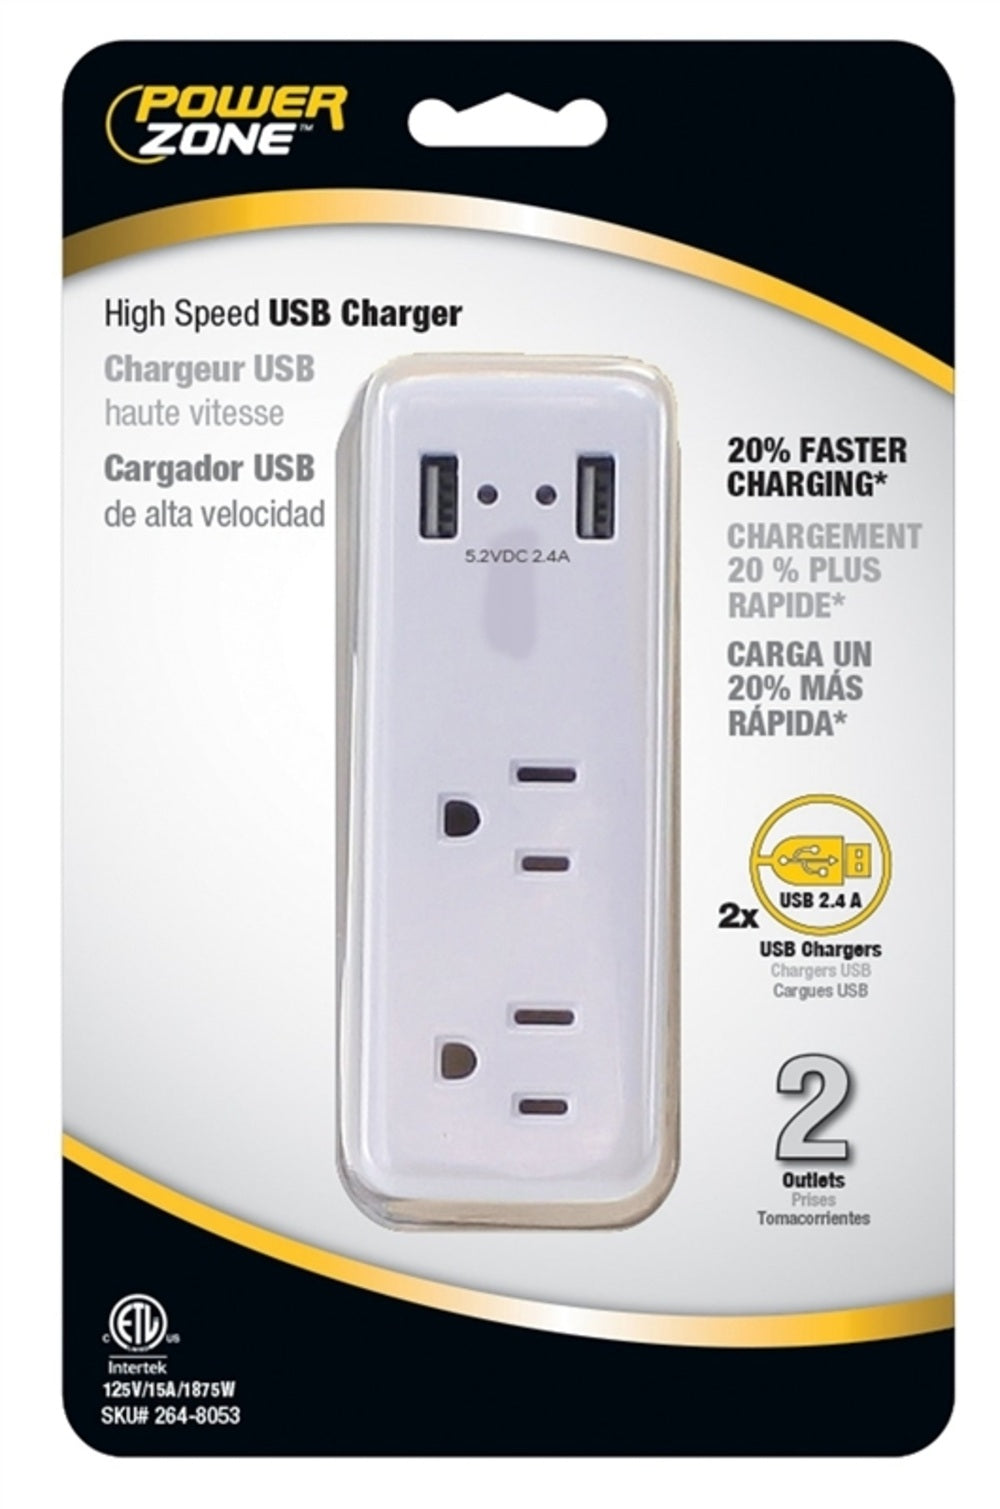 PowerZone ORUSB242 USB Charger, 2 Outlets